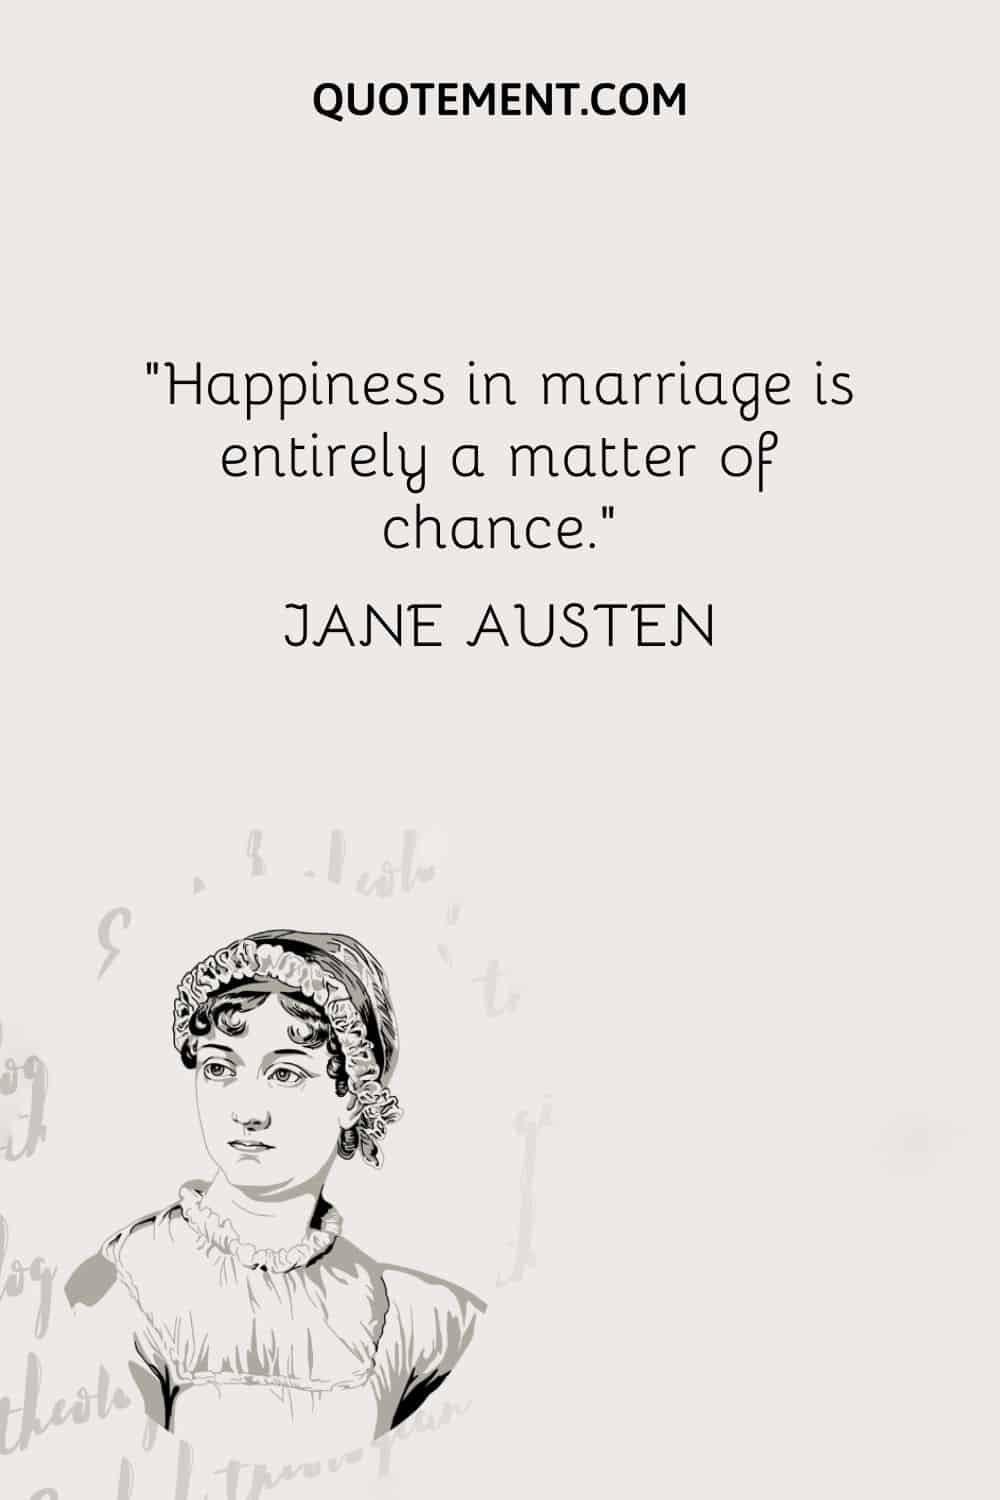 Happiness in marriage is entirely a matter of chance. — Jane Austen